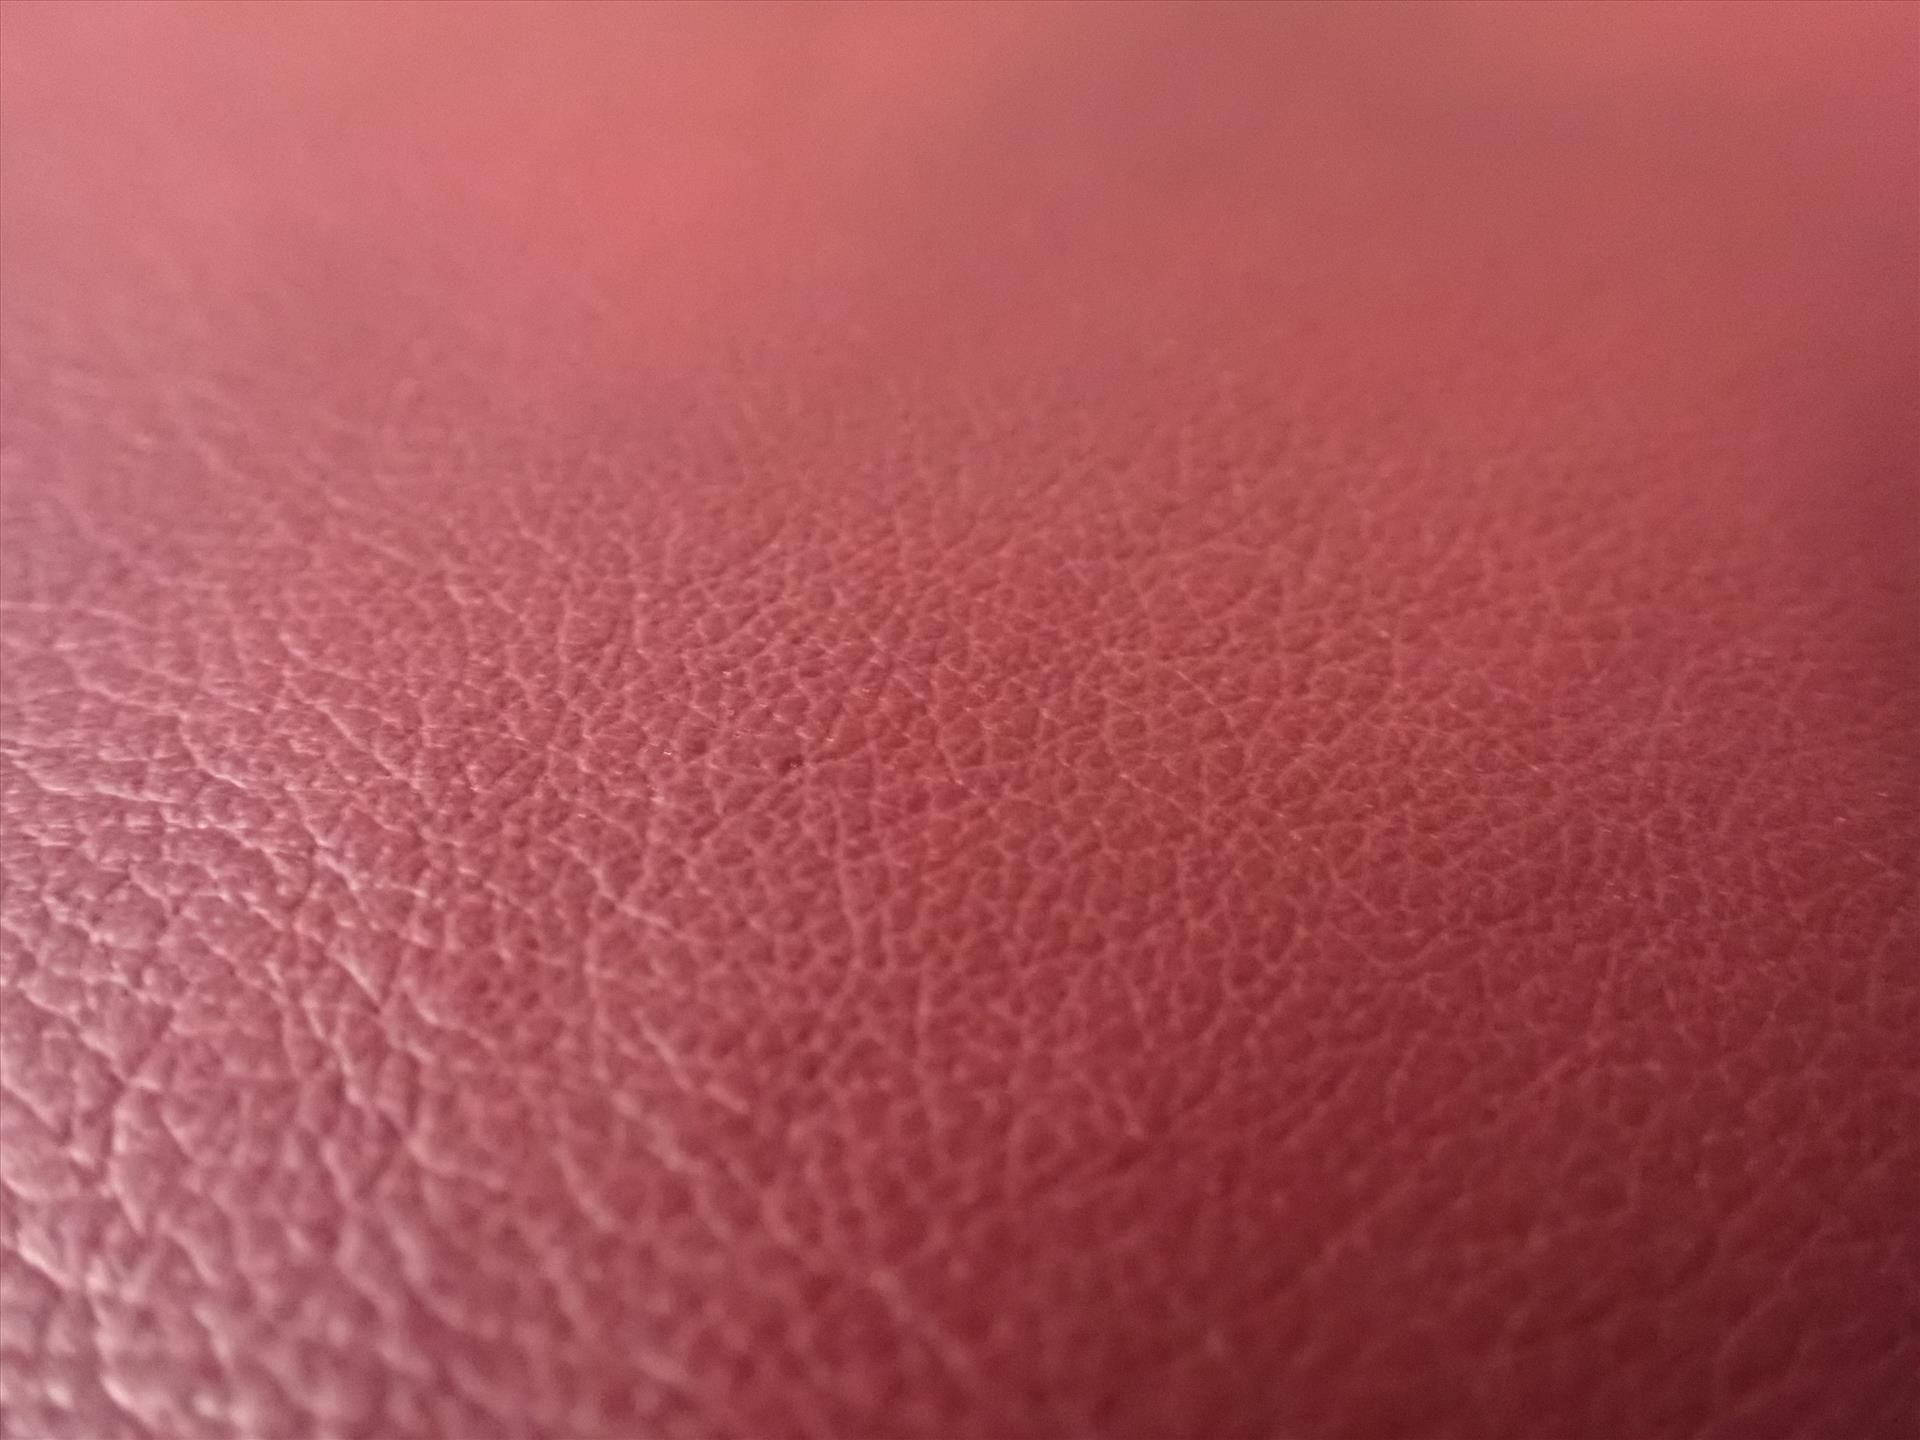 Leather, Supreme/Nutra/Bordeaux, partial hide, approx. 30 sq ft - Image 2 of 2